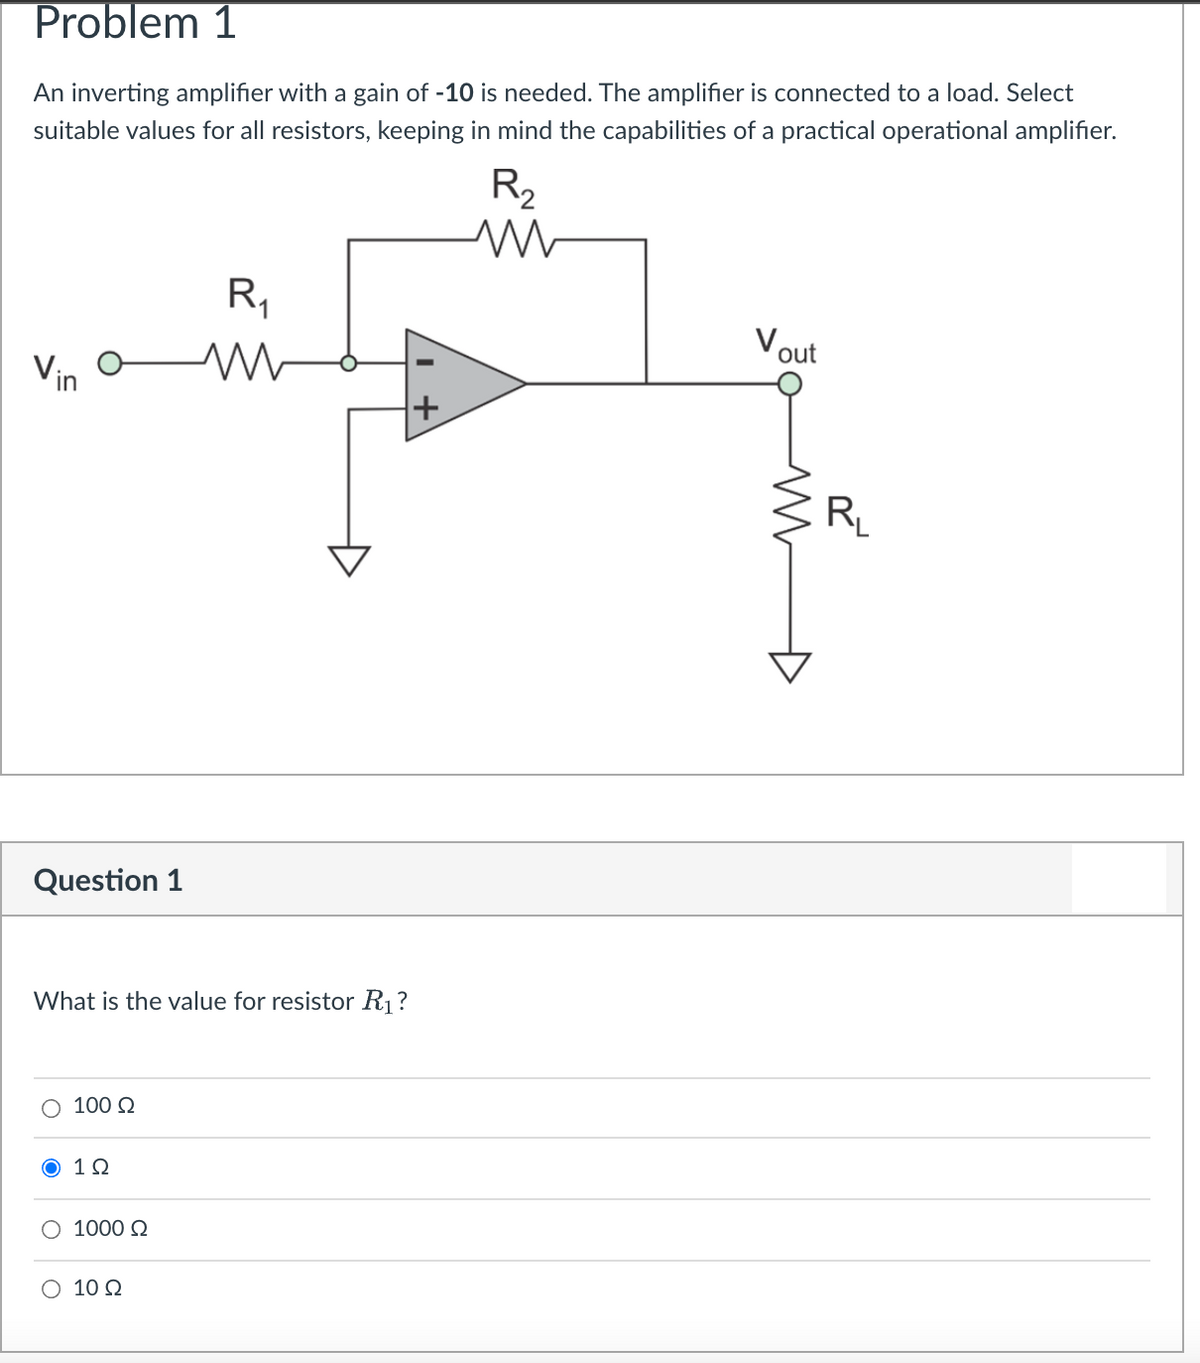 Problem 1
An inverting amplifier with a gain of -10 is needed. The amplifier is connected to a load. Select
suitable values for all resistors, keeping in mind the capabilities of a practical operational amplifier.
R2
R,
Vout
Vin
R
Question 1
What is the value for resistor R1?
O 100 Q
Ο 1Ω
1000 Q
O 10 Q
